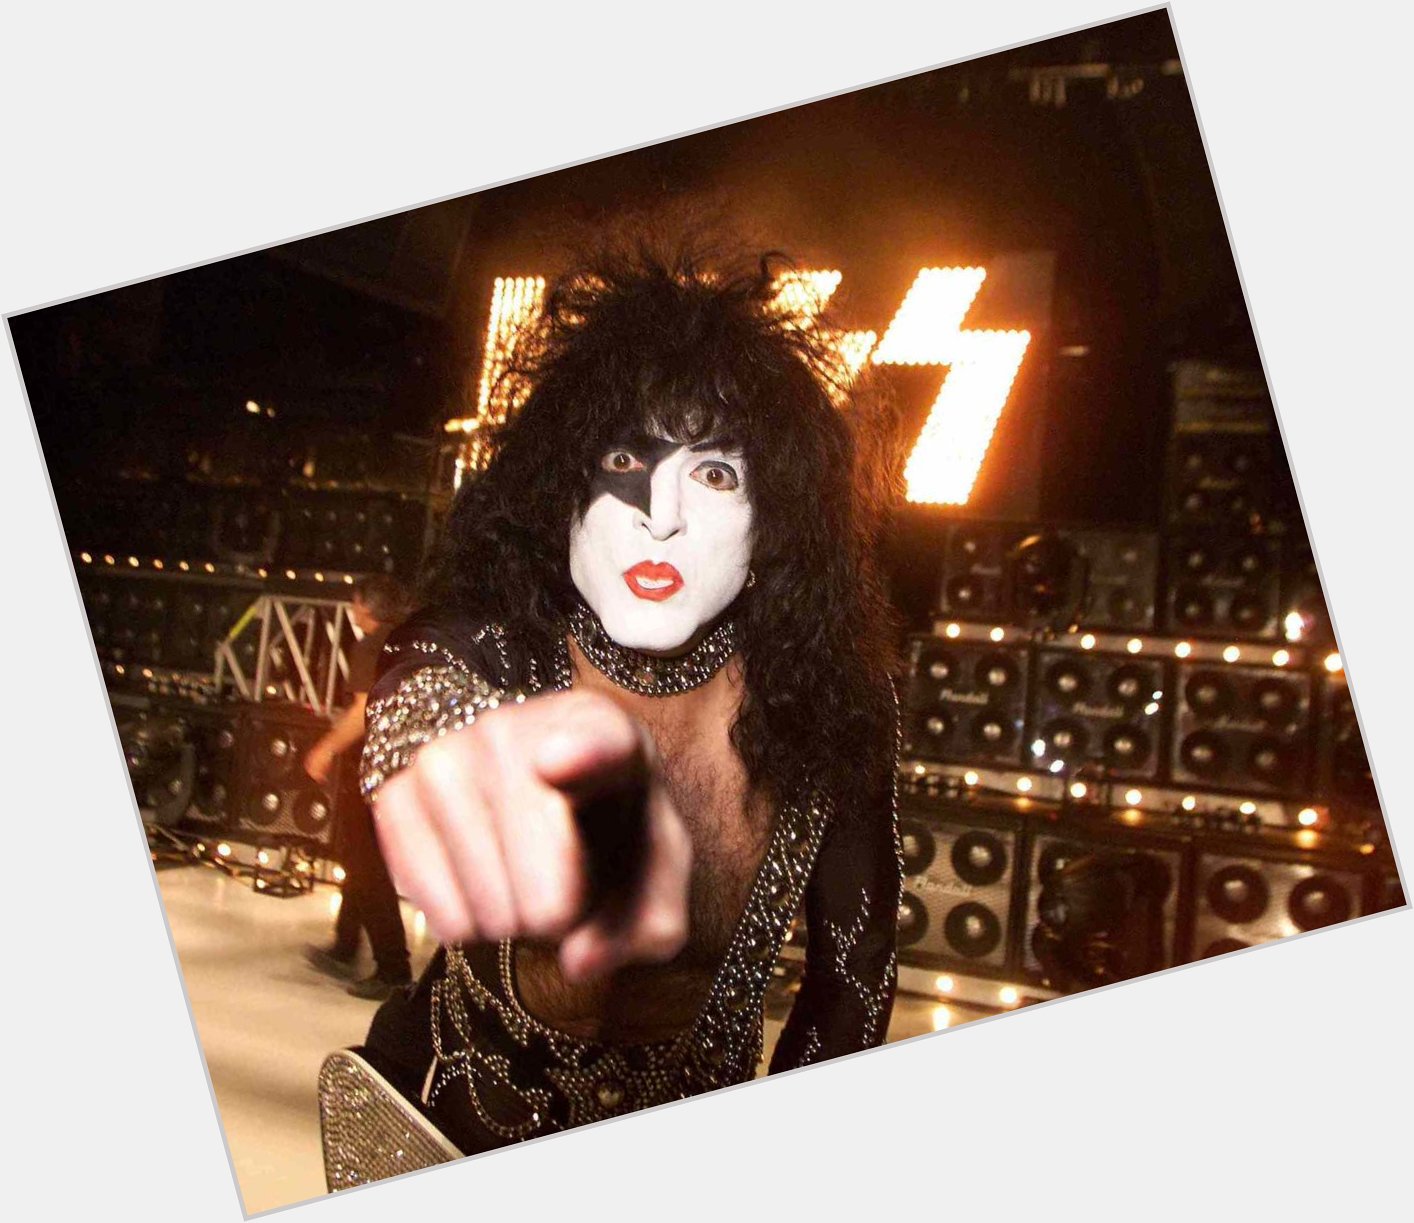  Happy 65th Birthday, Paul Stanley Hope I rock 1/2 as much at 65   